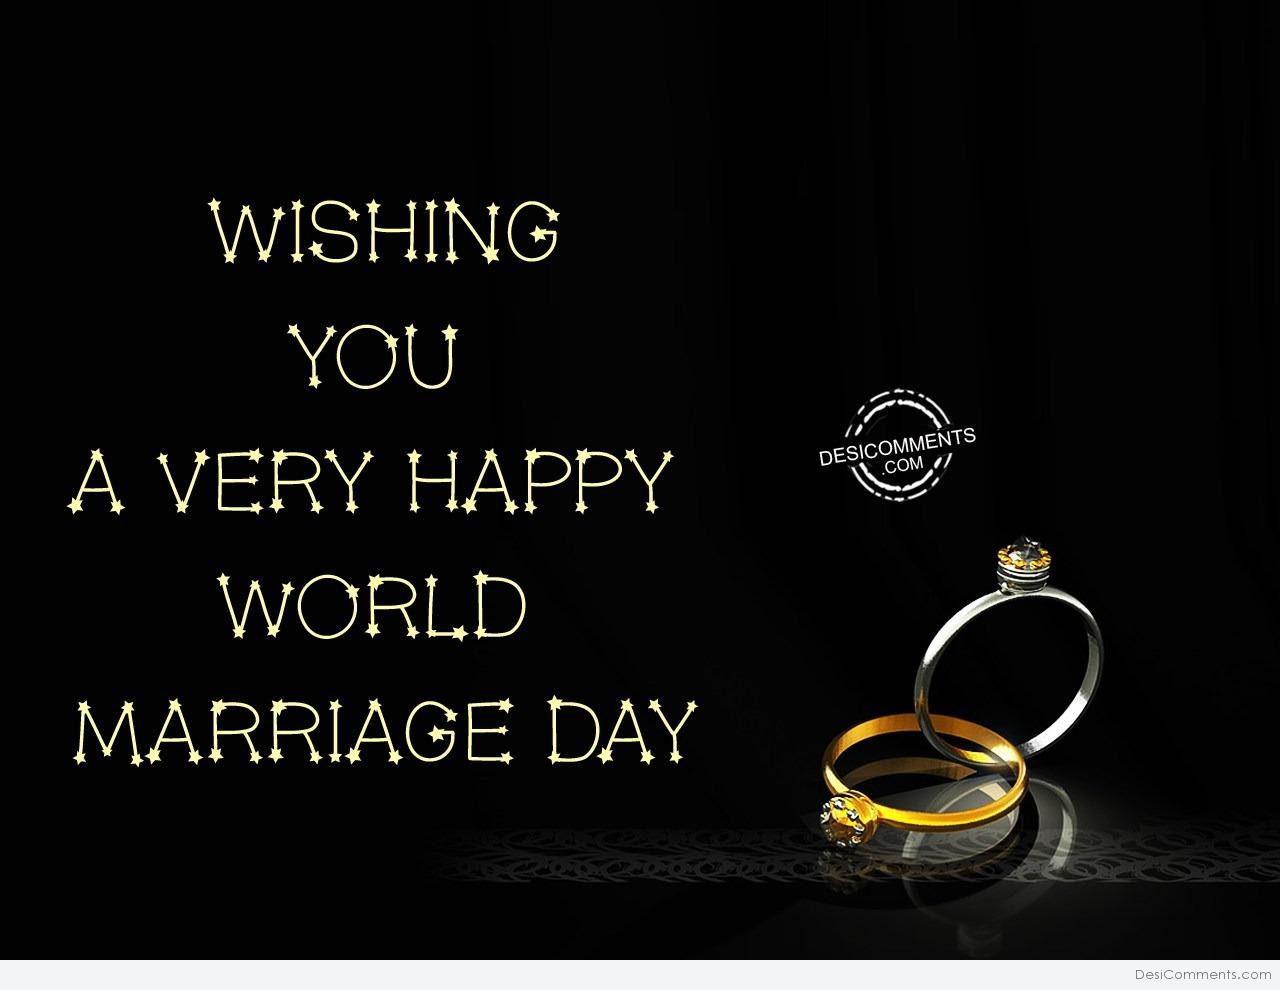 Wishing You A Very Happy World Marriage Day - DesiComments.com